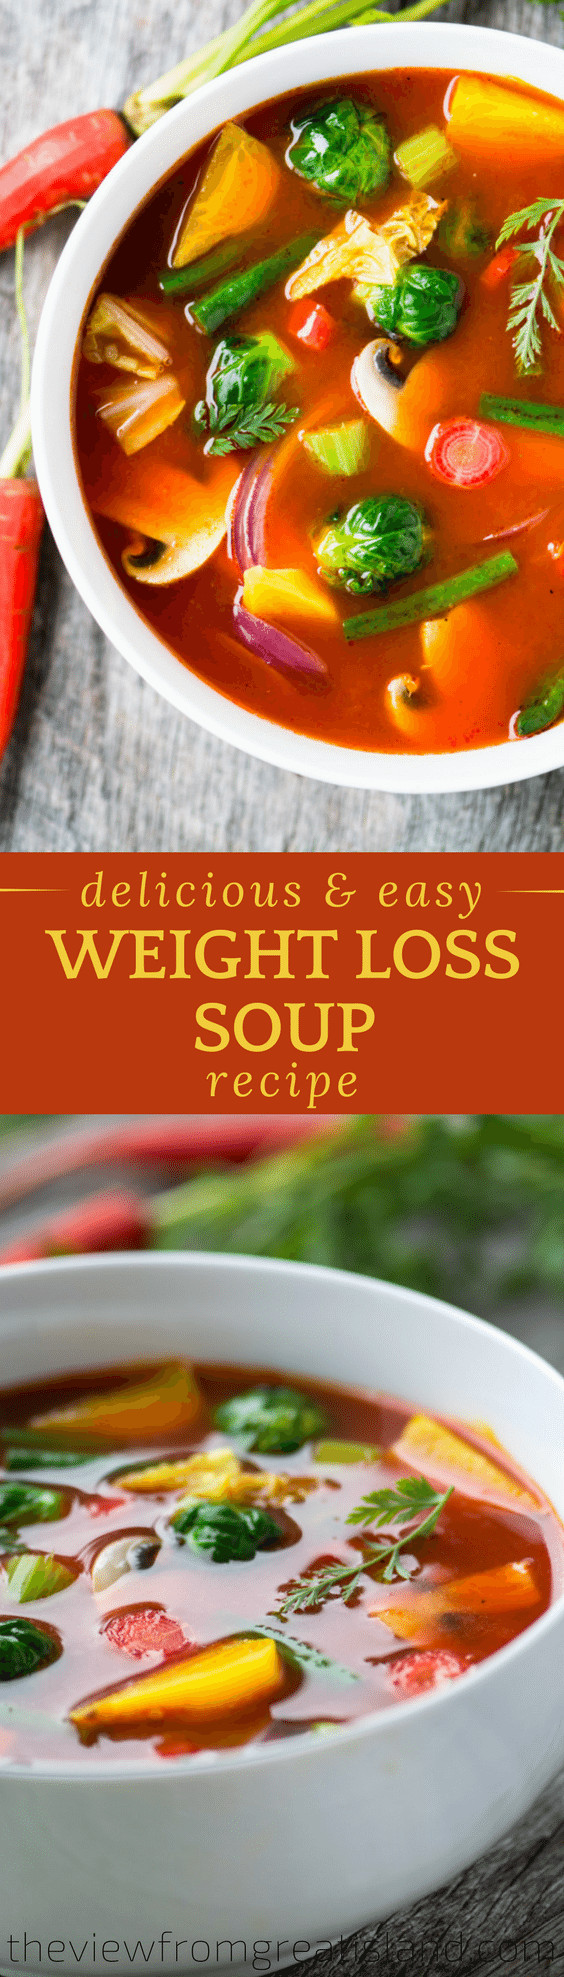 Healthy Canned Soups For Weight Loss
 Weight Loss Soup Recipe